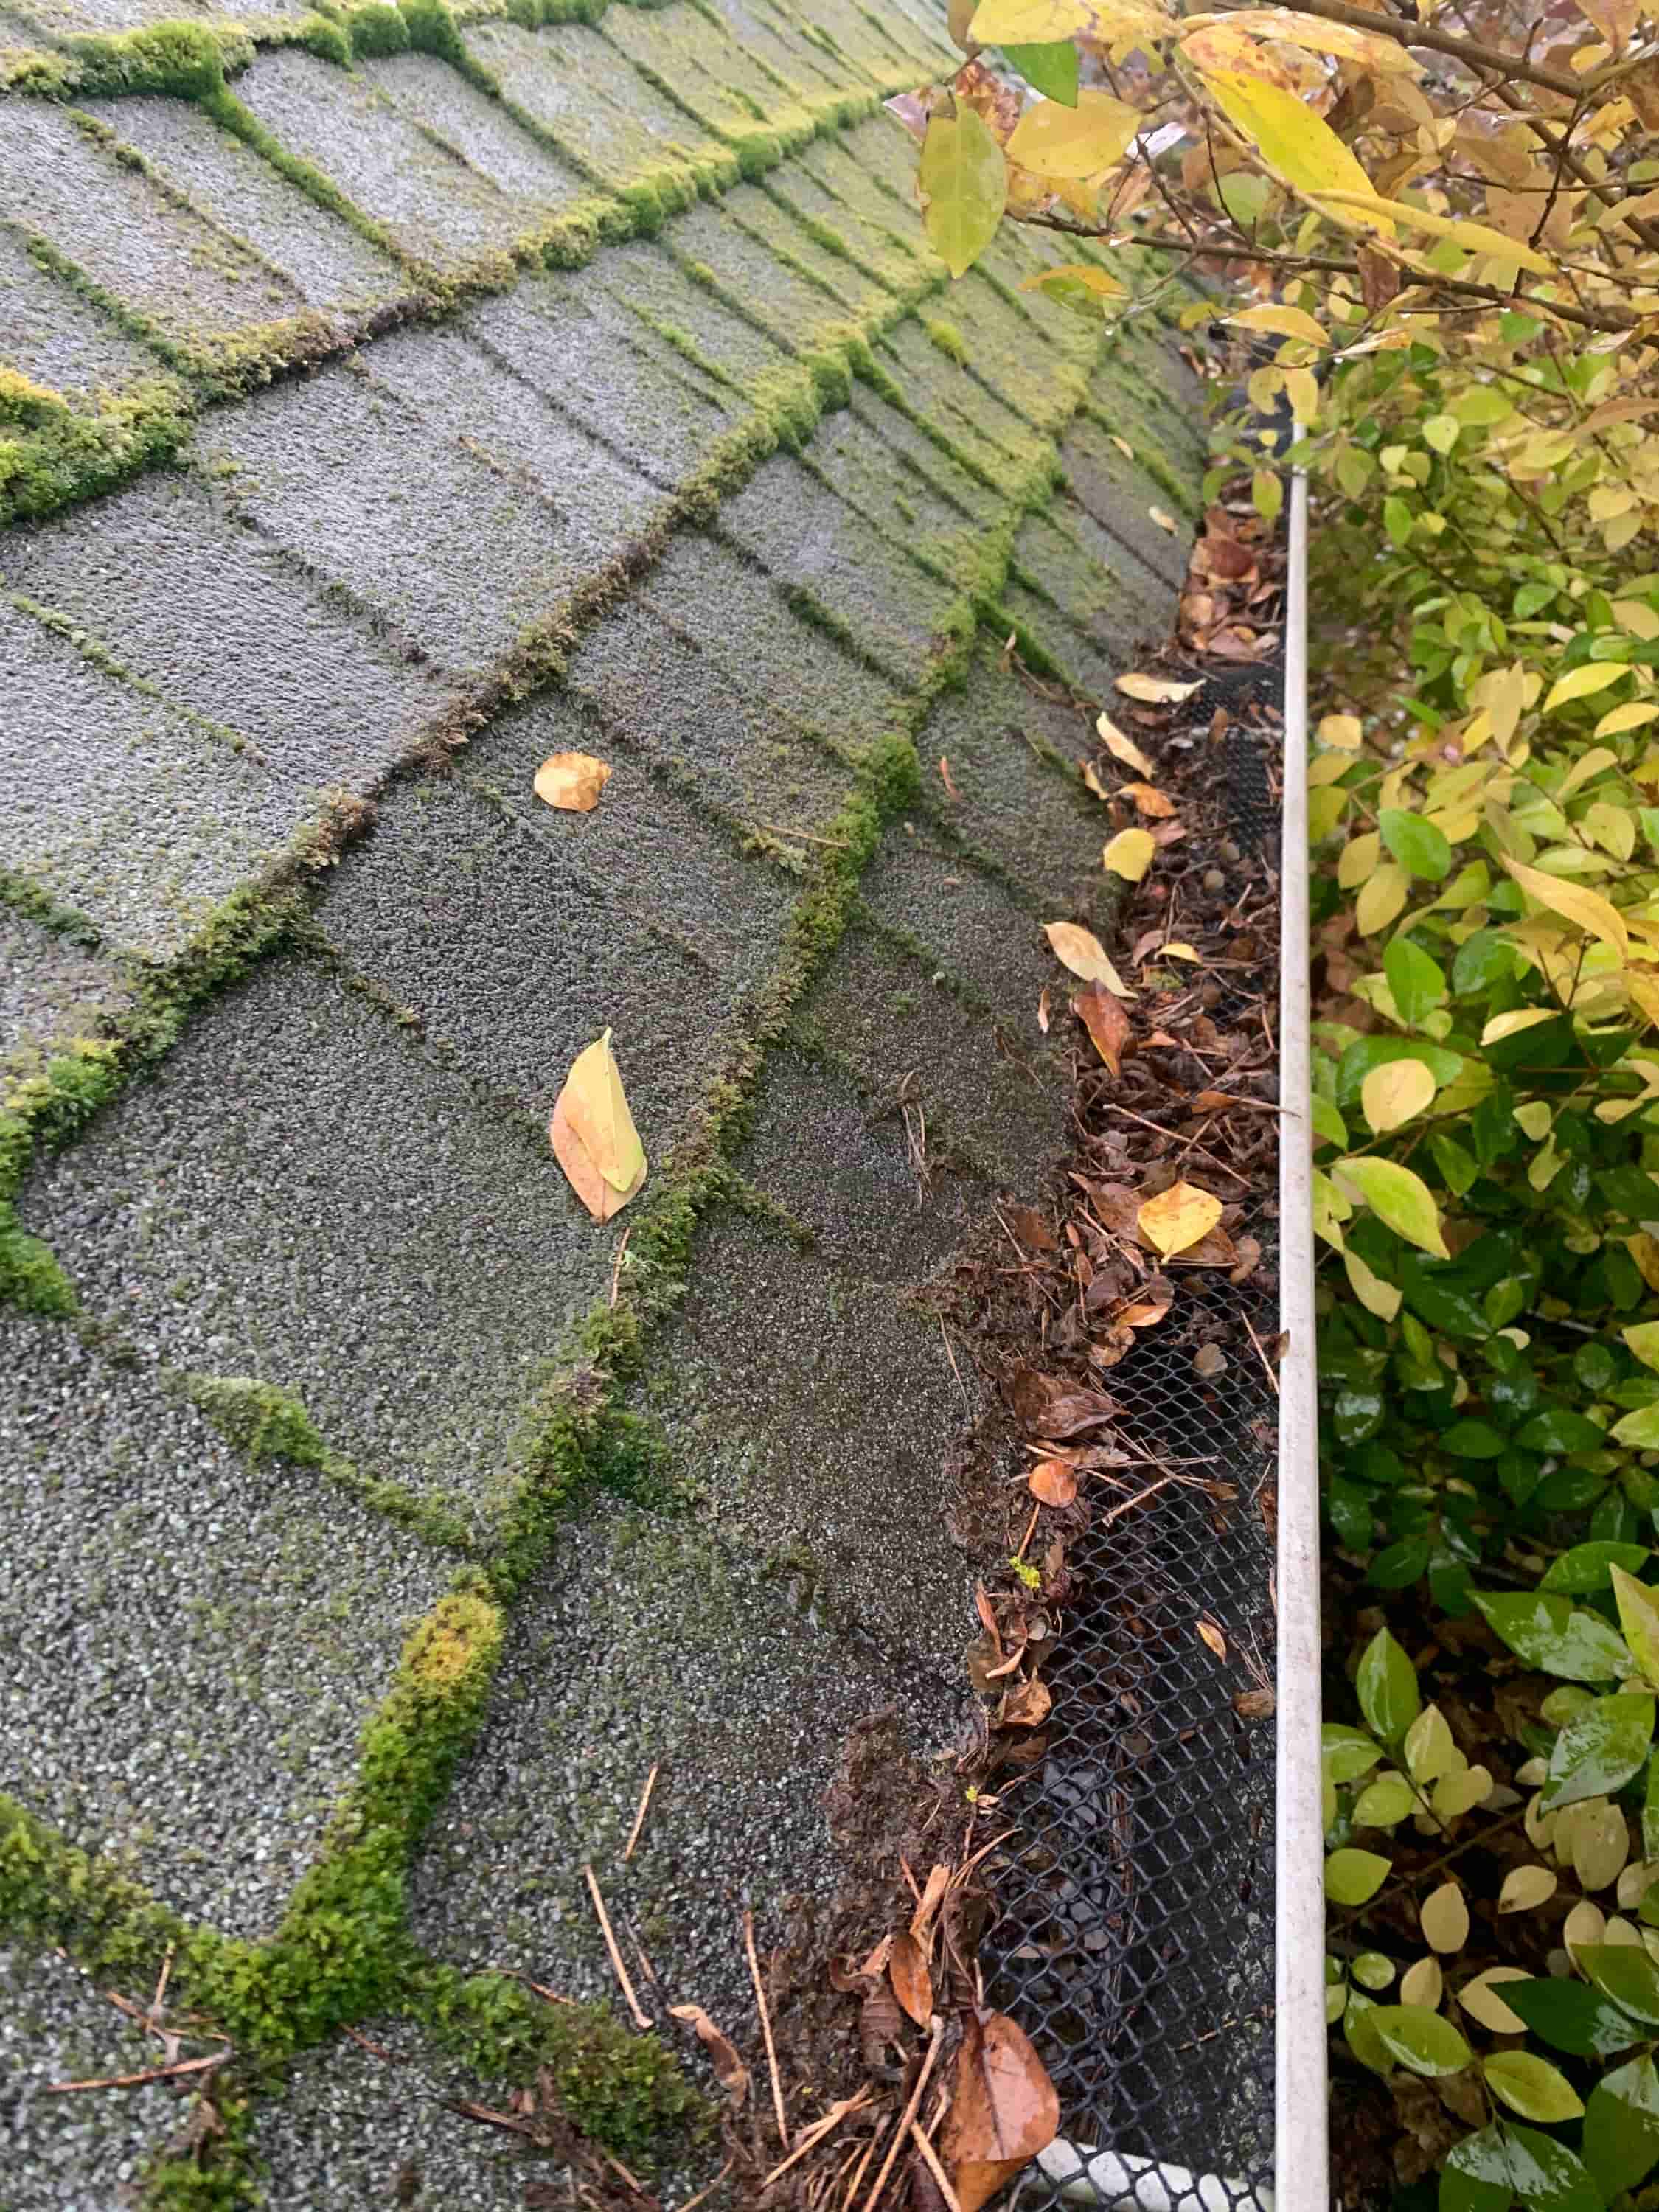 gutter cleaning from ground level